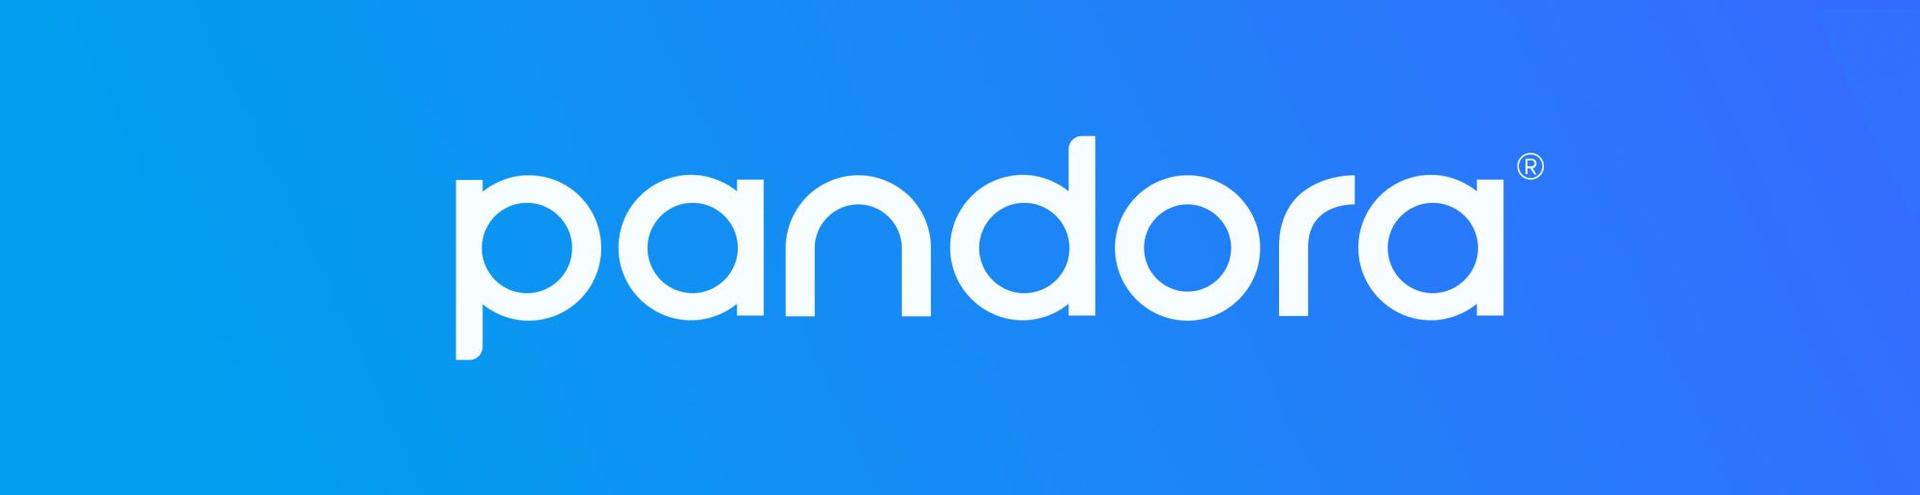 How to Build a Music App Like Pandora: Complete Guide from Exploration to Launch